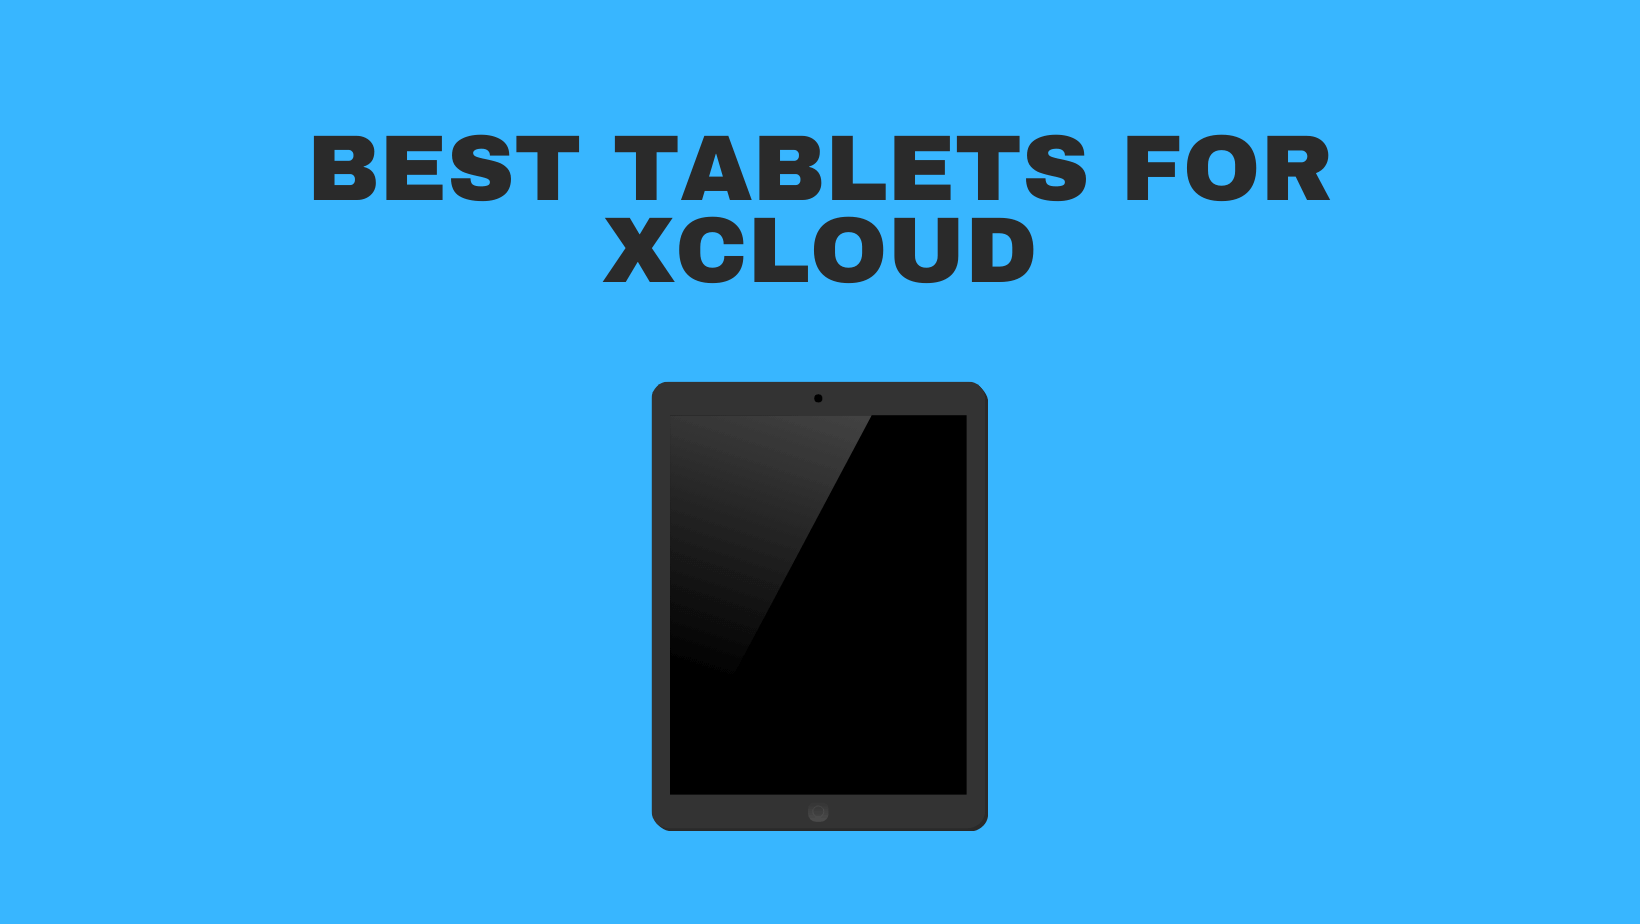 Best Tablets For xCloud